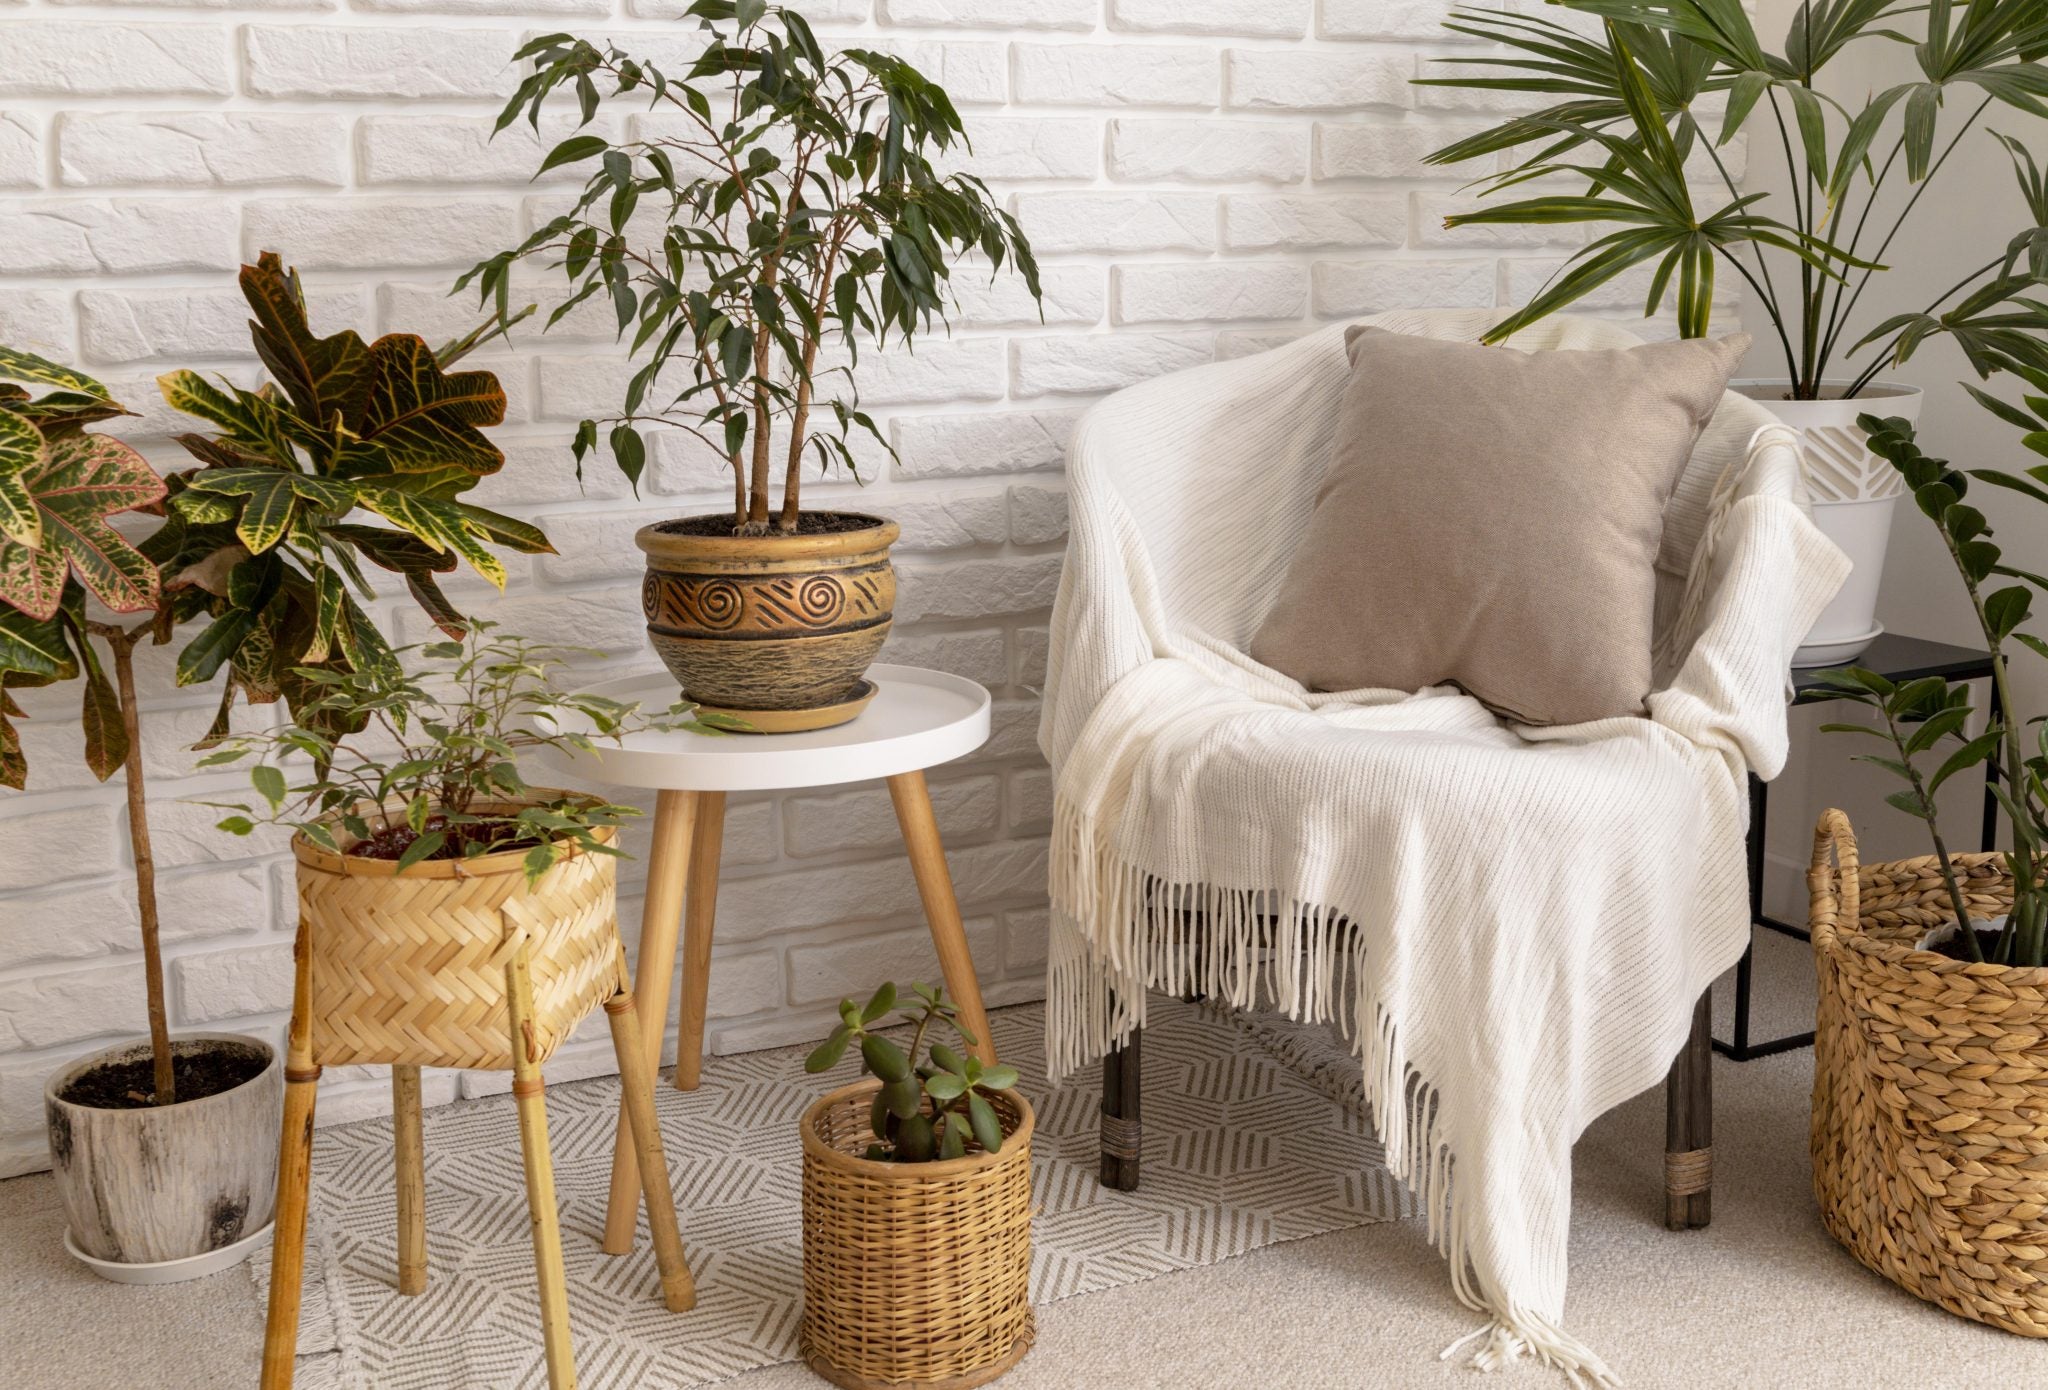 BRING NATURE INTO YOUR HOME – HOW TO EMBRACE WINTER GREENERY